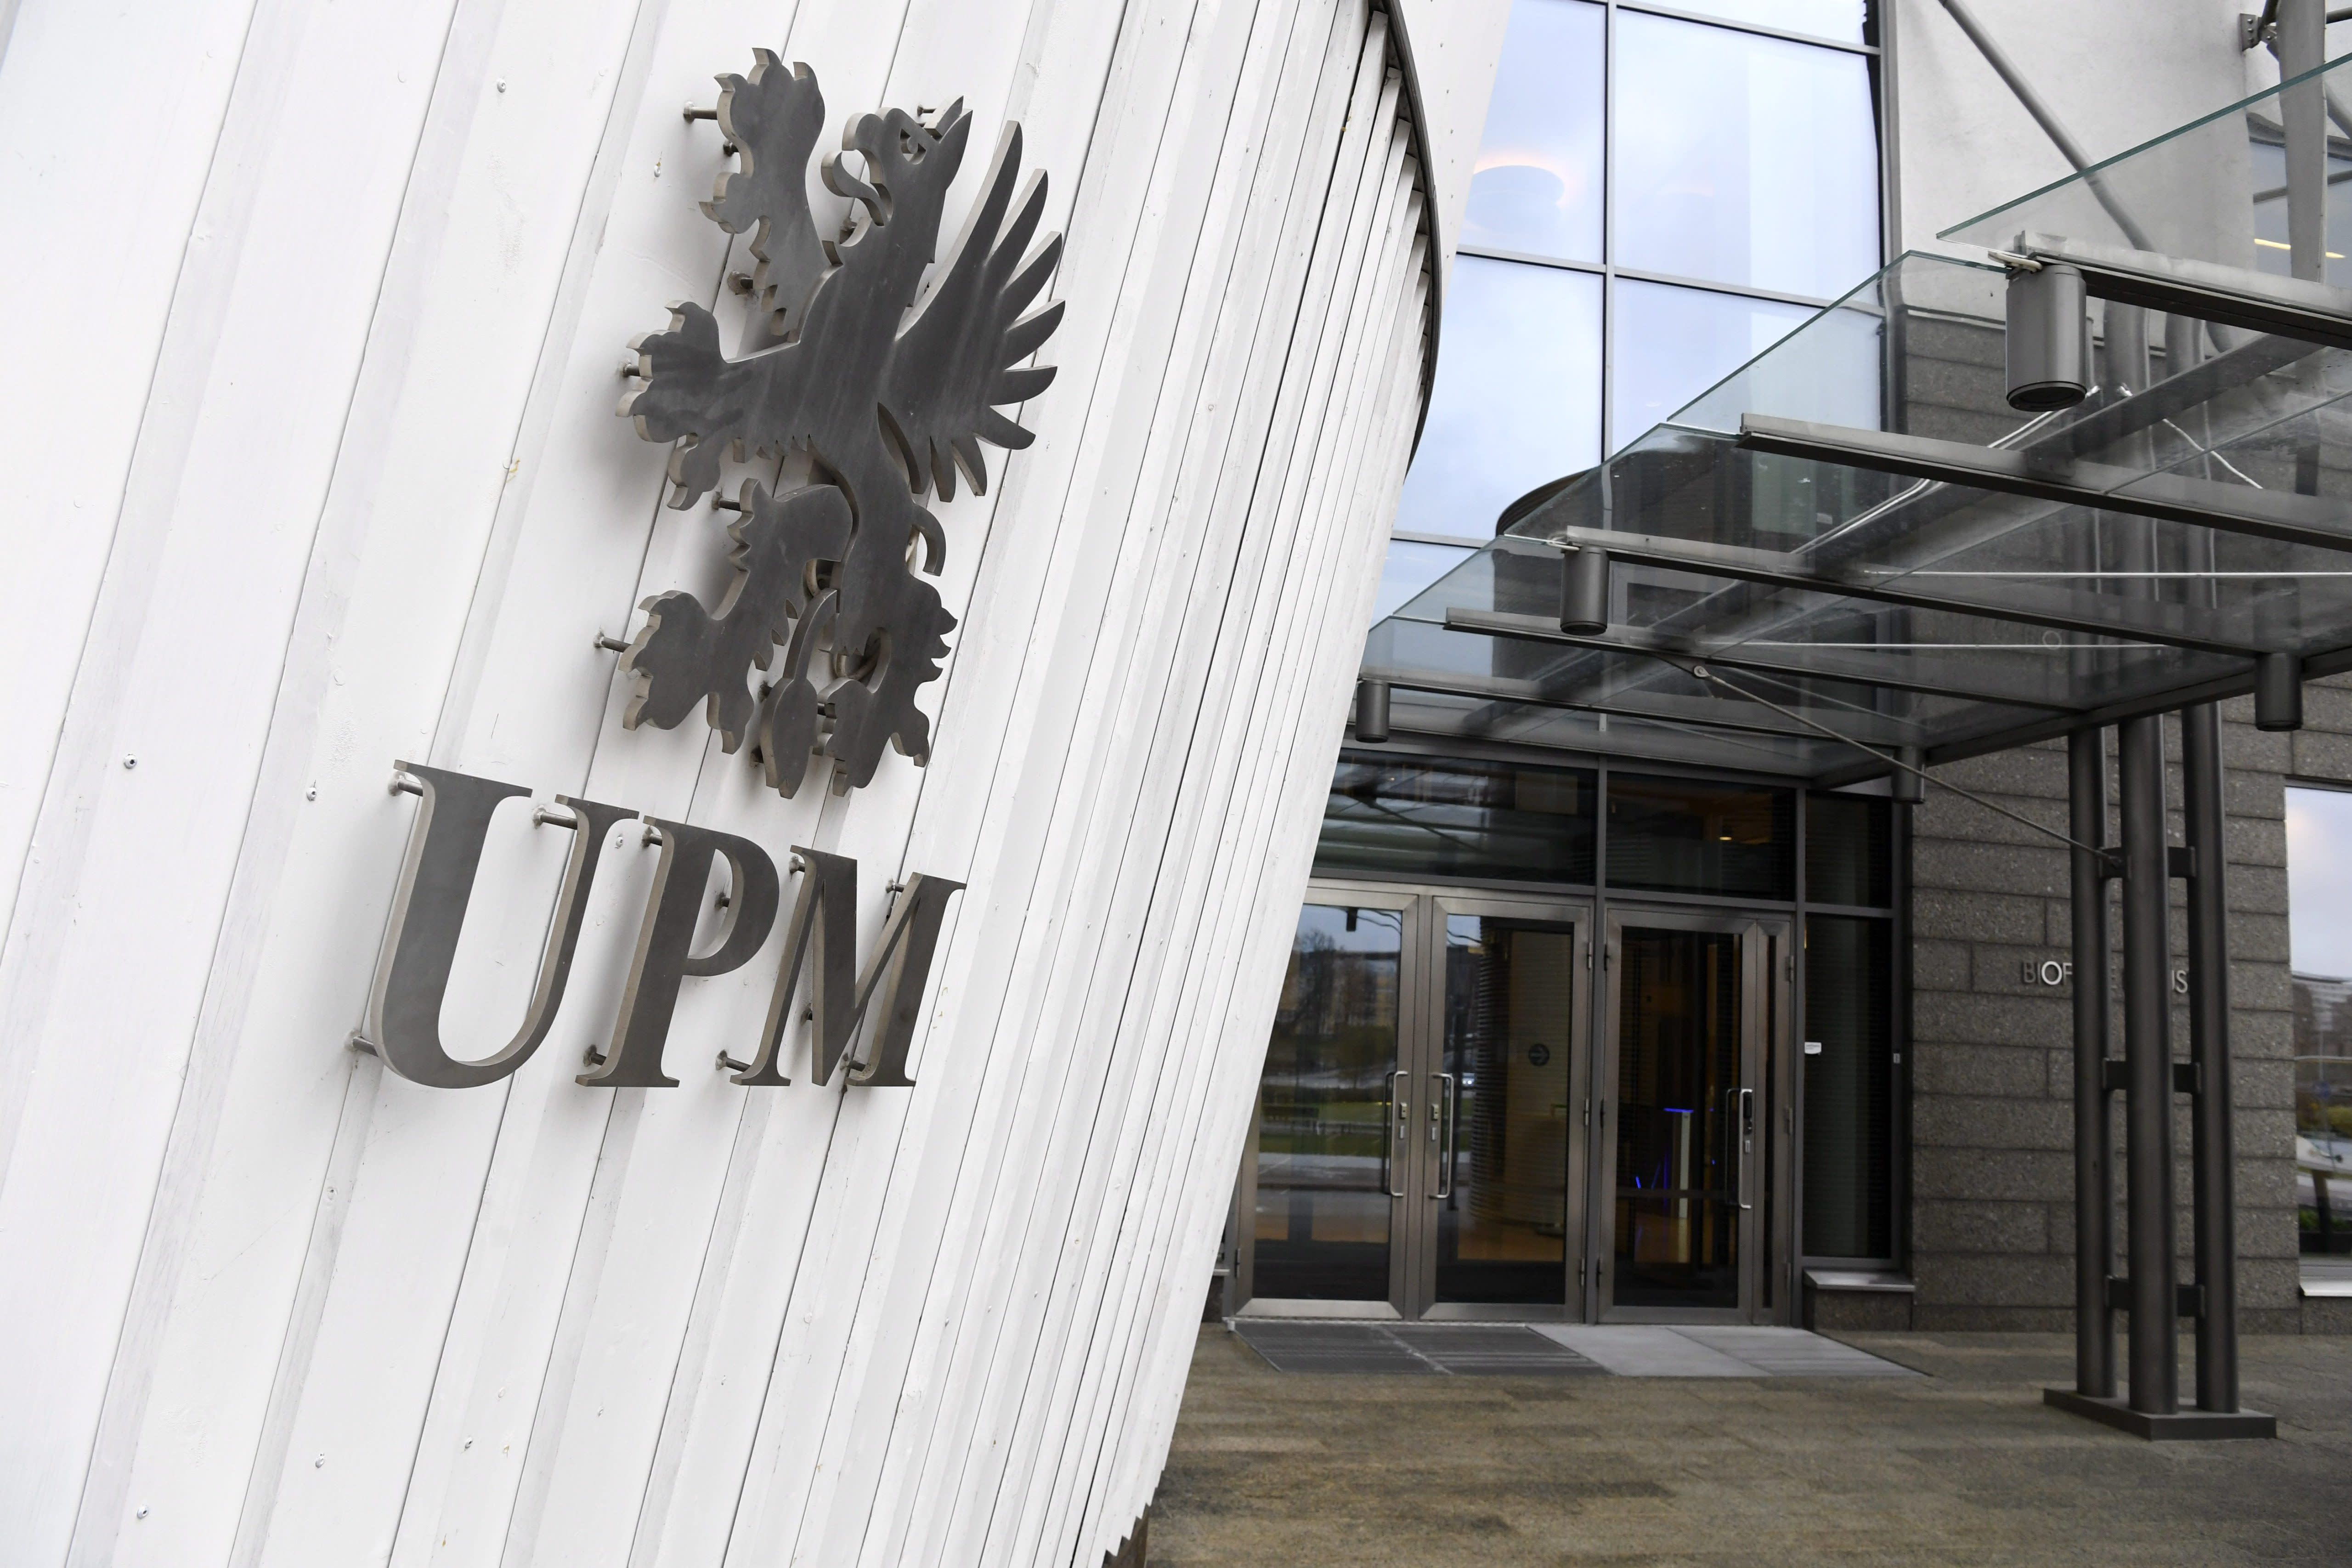 According to the law, employees must return to UPM's mills